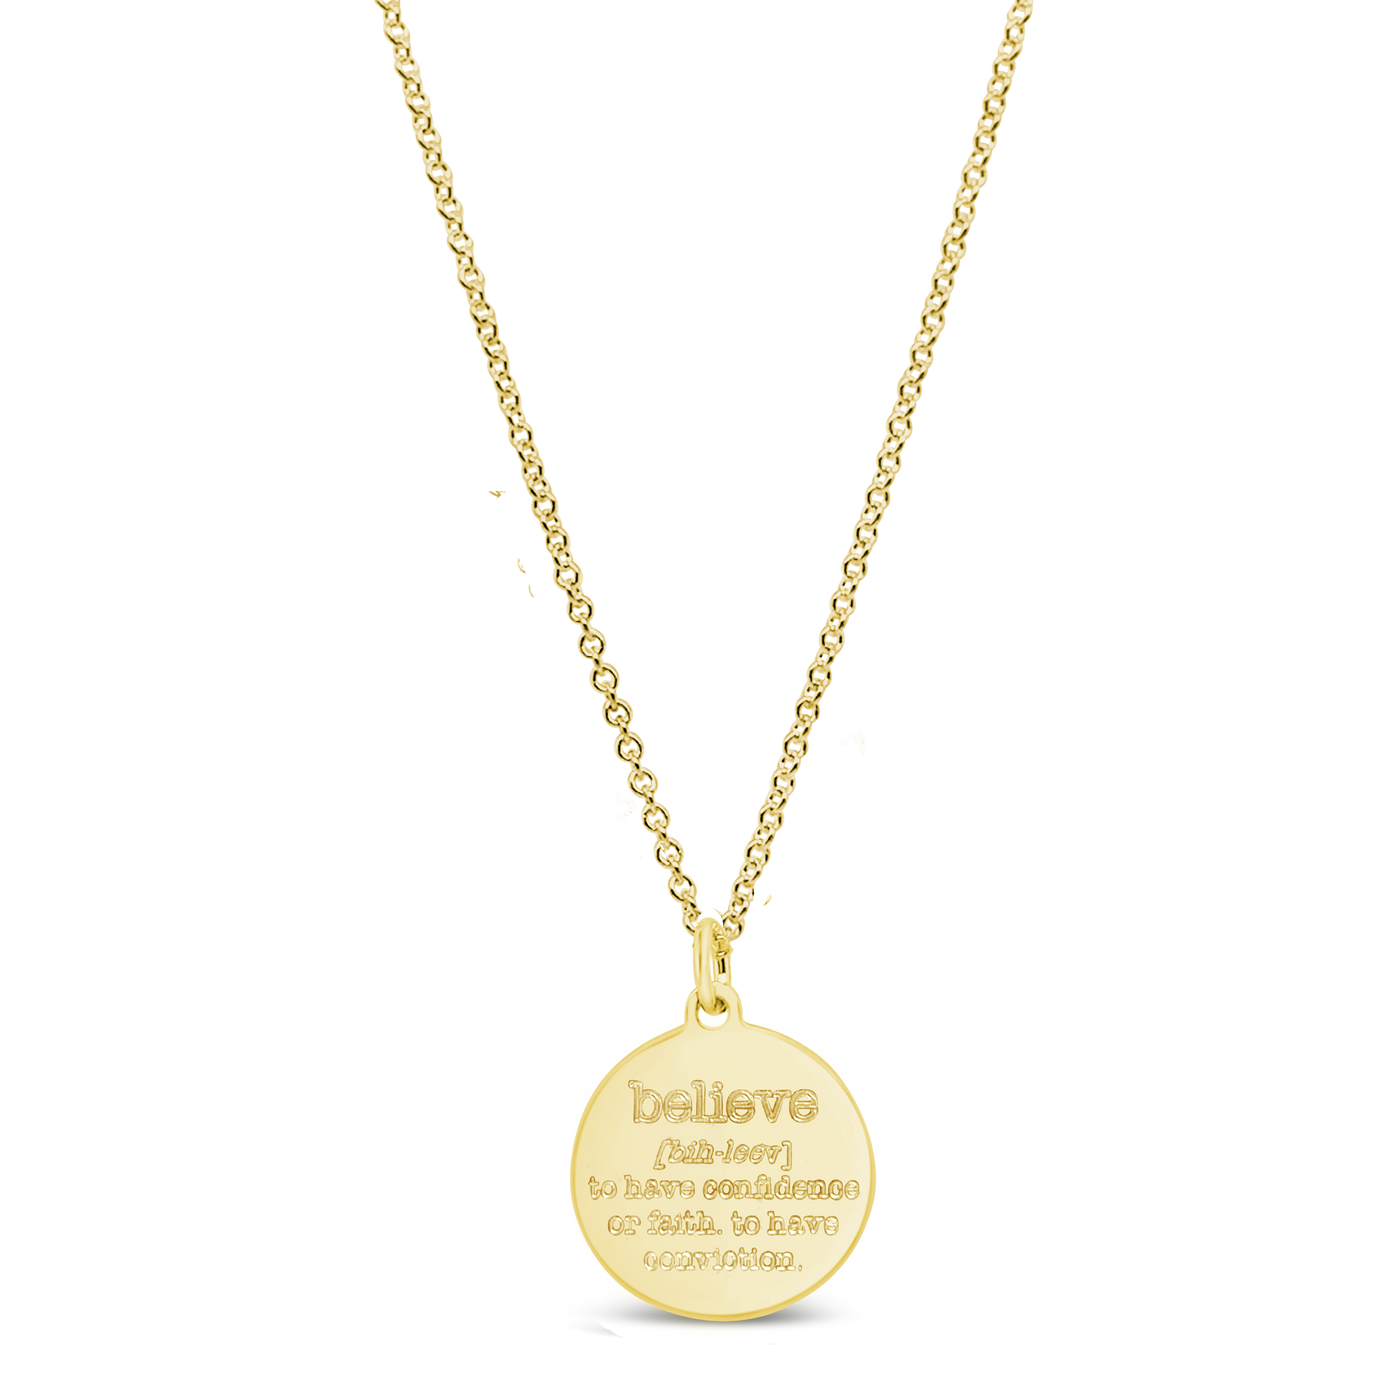 Believe Defined Disc Necklace